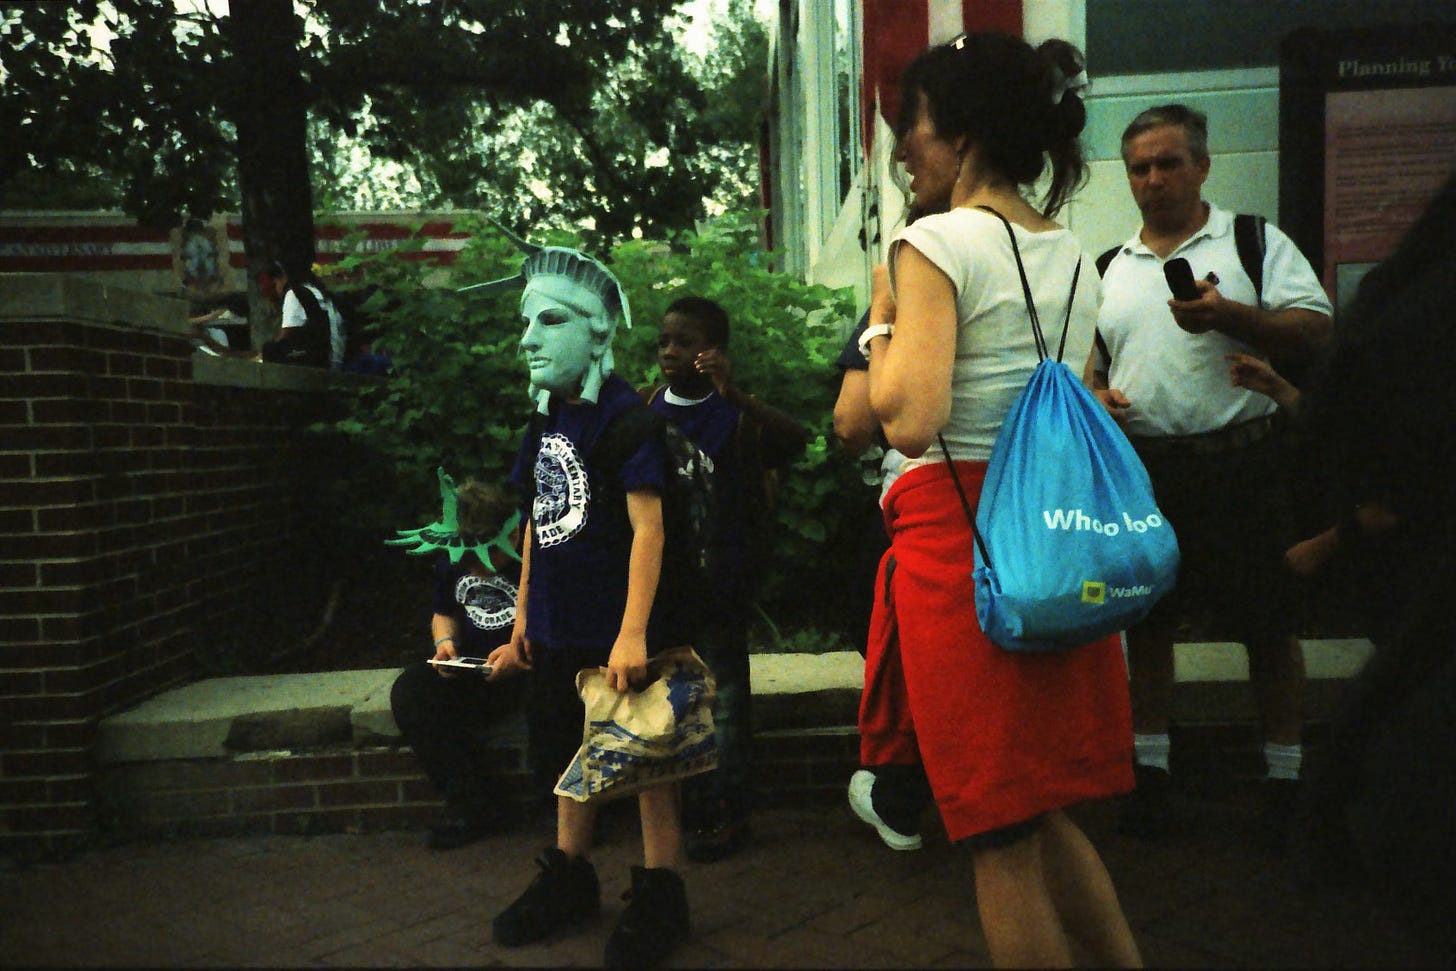 A boy wears a Statue of Liberty mask while a woman stands nearby.